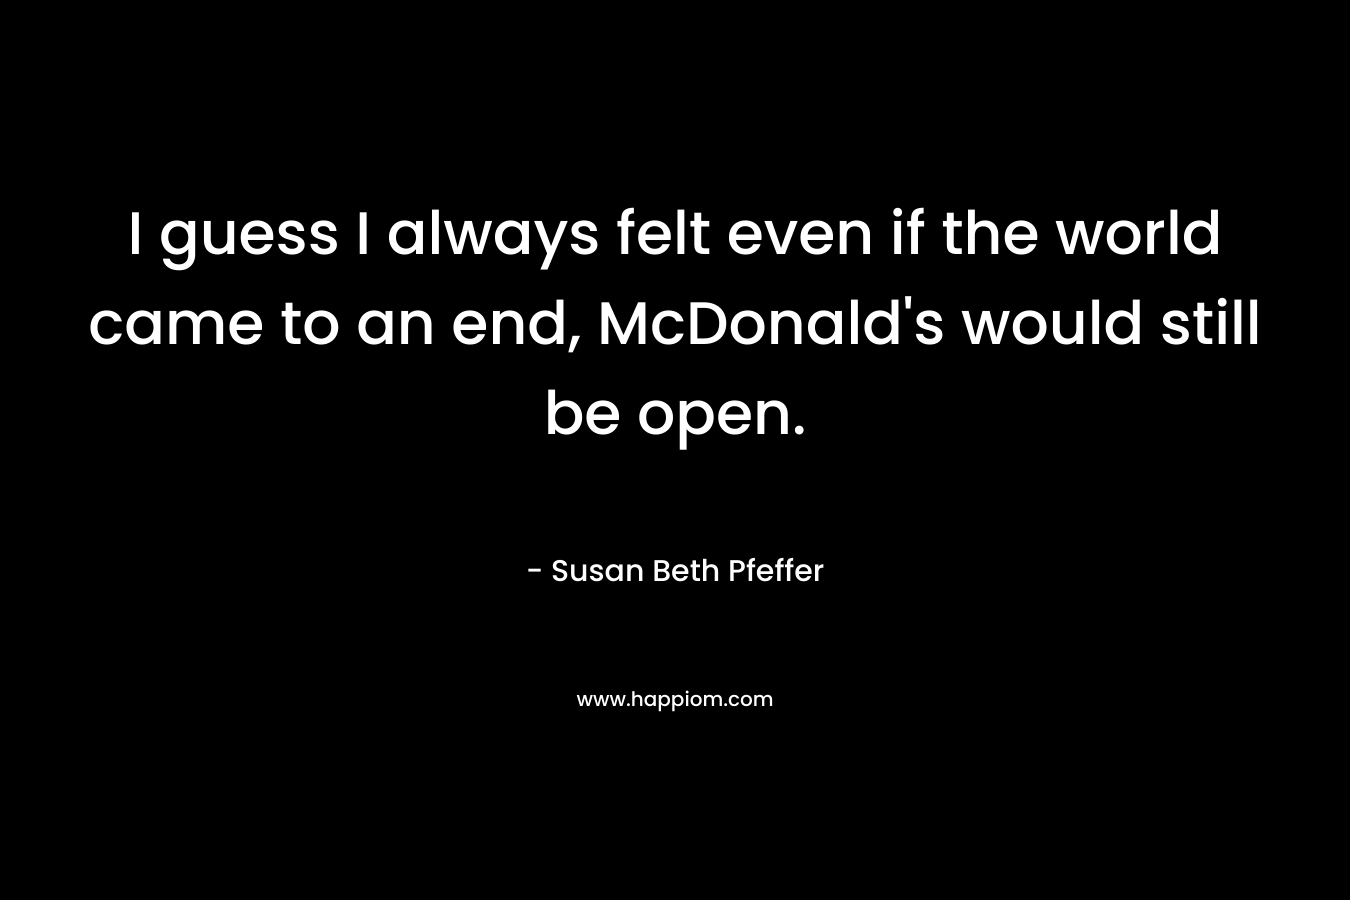 I guess I always felt even if the world came to an end, McDonald's would still be open.